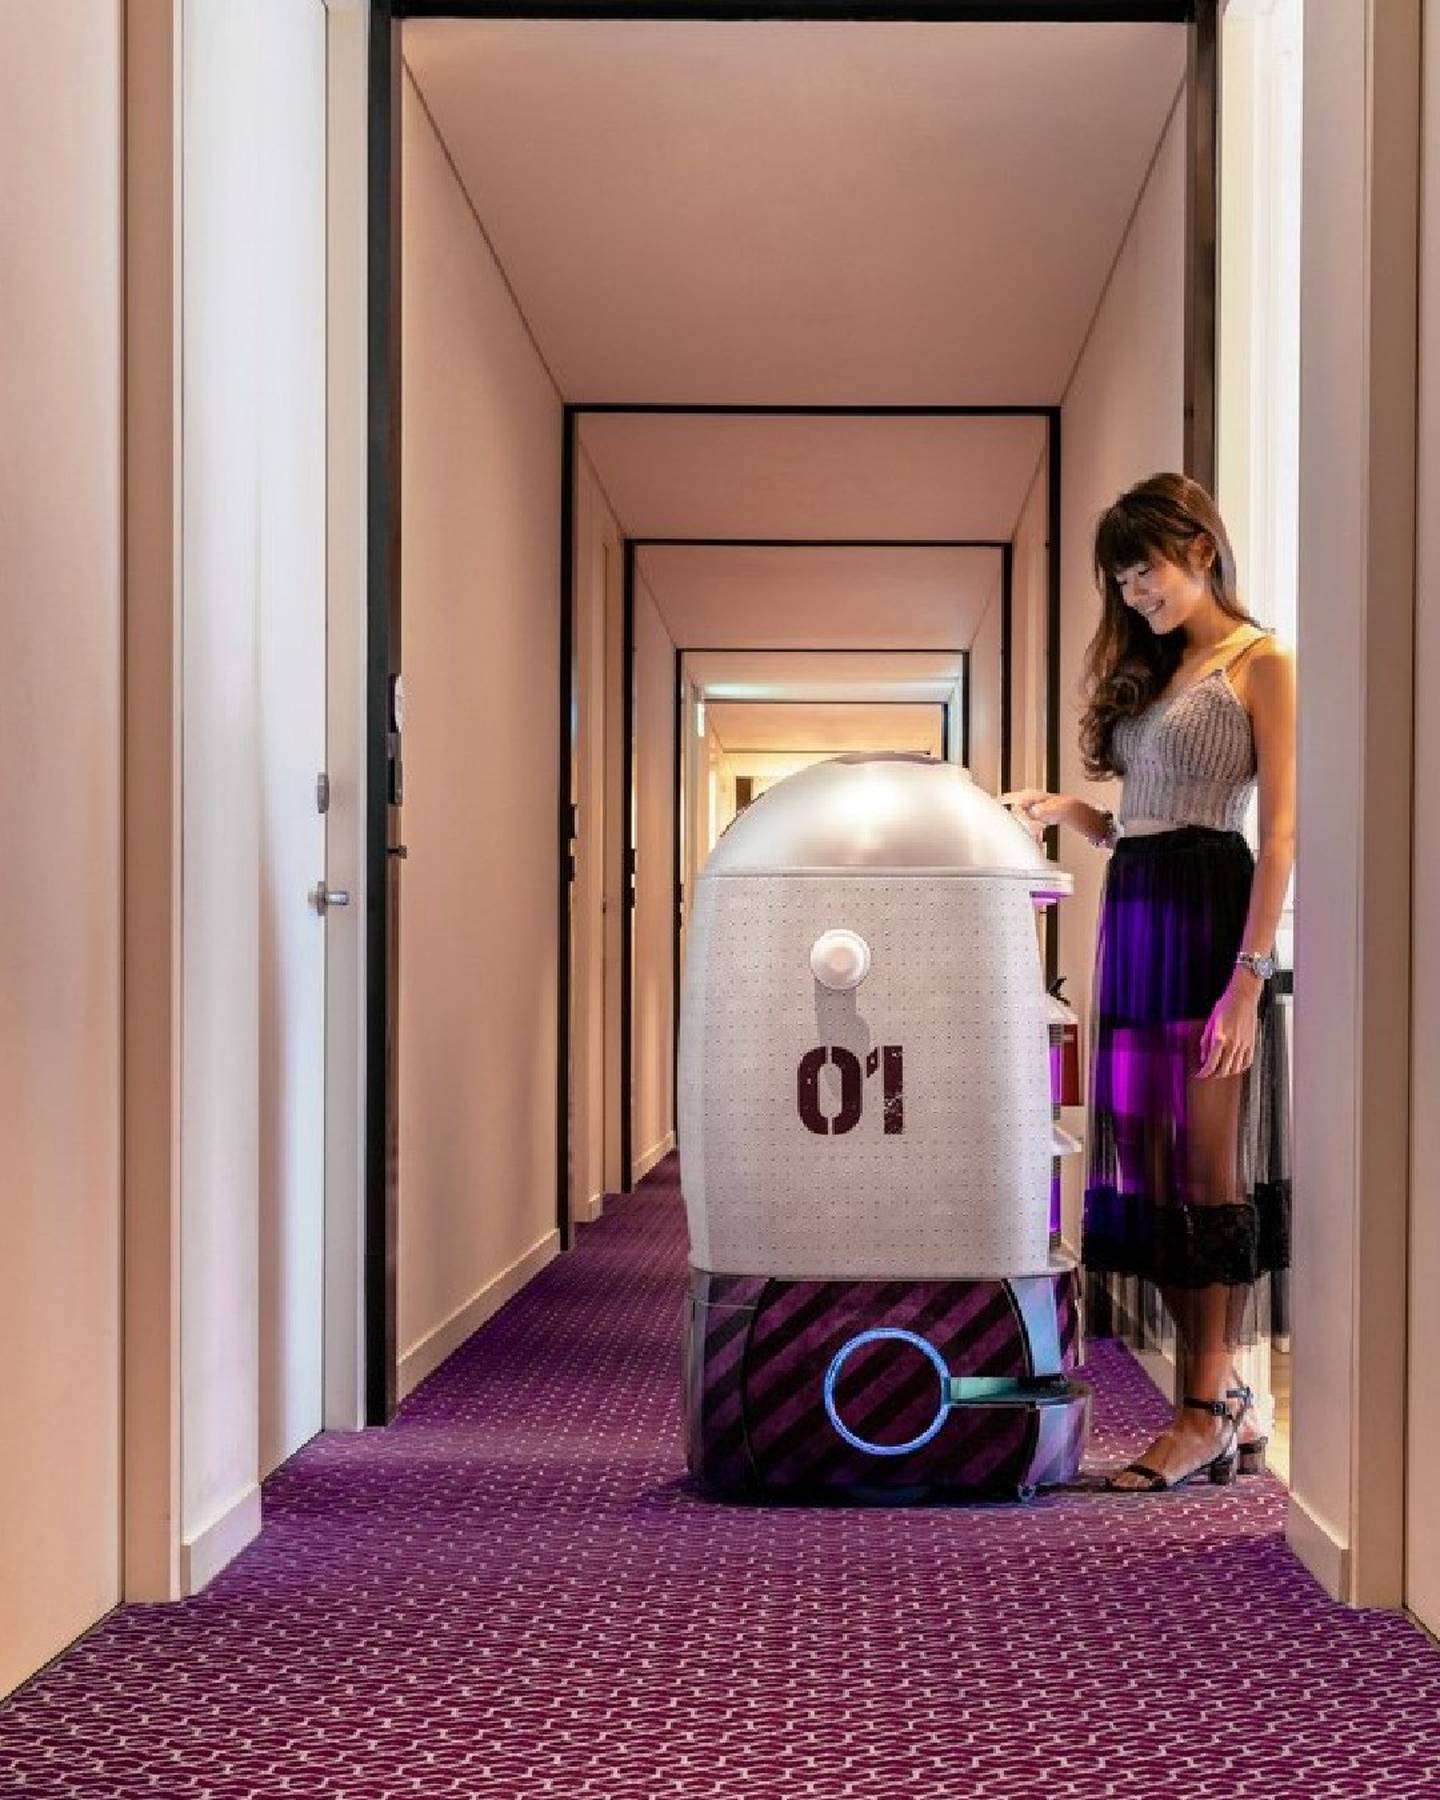 Travellers staying at Yotel Oxagon will offer a robot concierge service. Photo: Yotel / Facebook